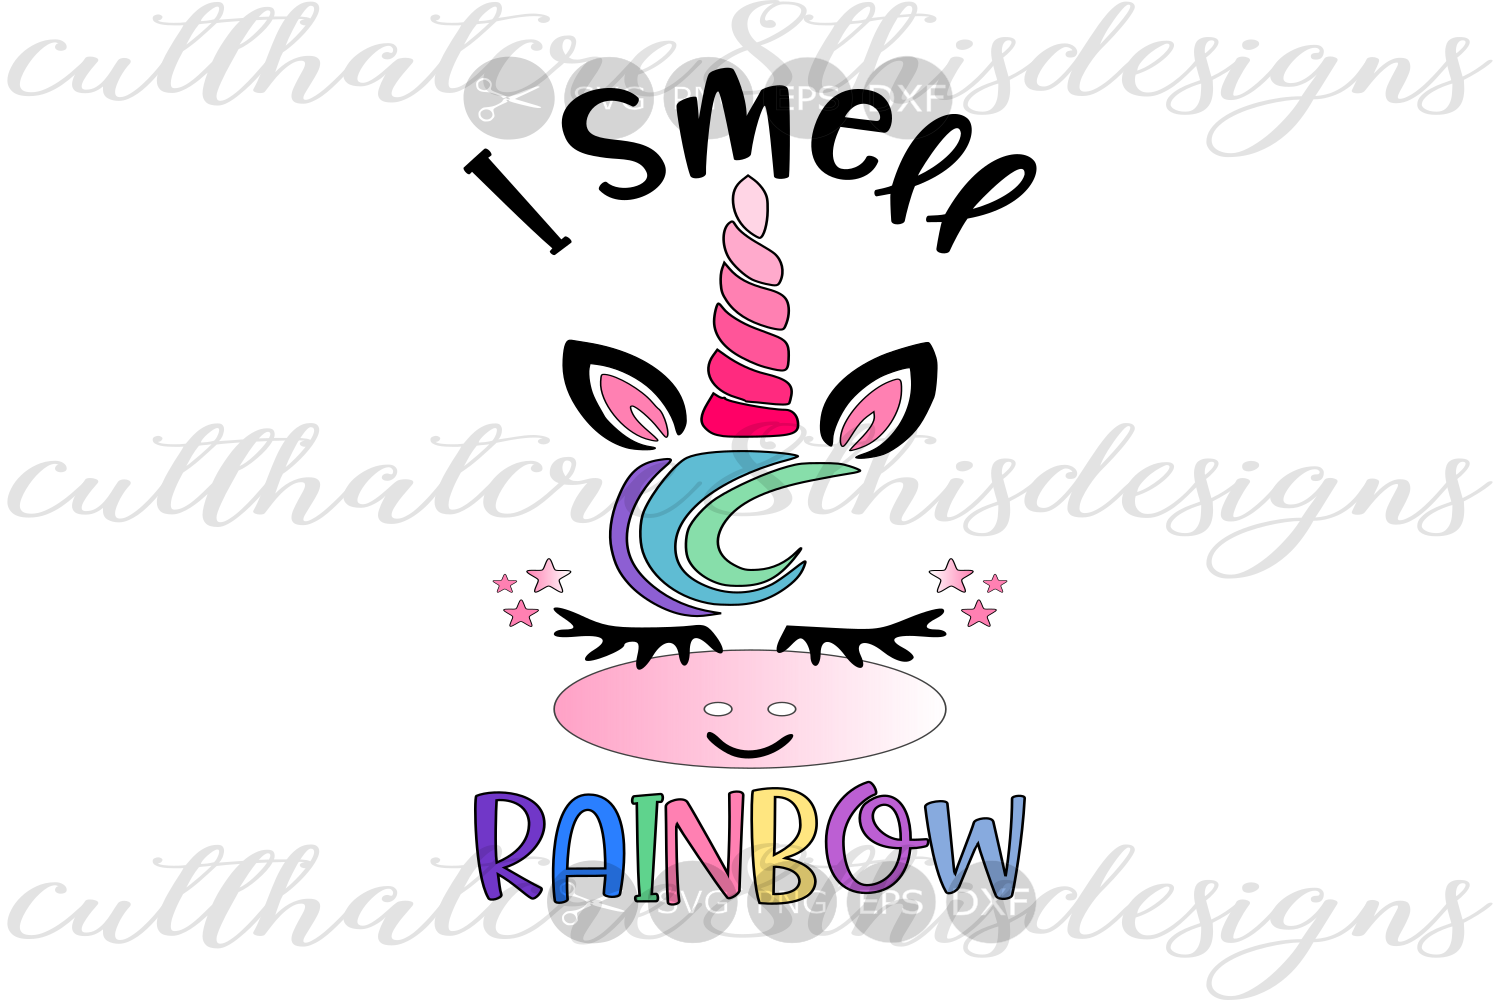 I Smell Rainbow, Unicorn, Colourful, Quotes, Sayings, Cut File, SVG, PNG, EPS, DXF for ...